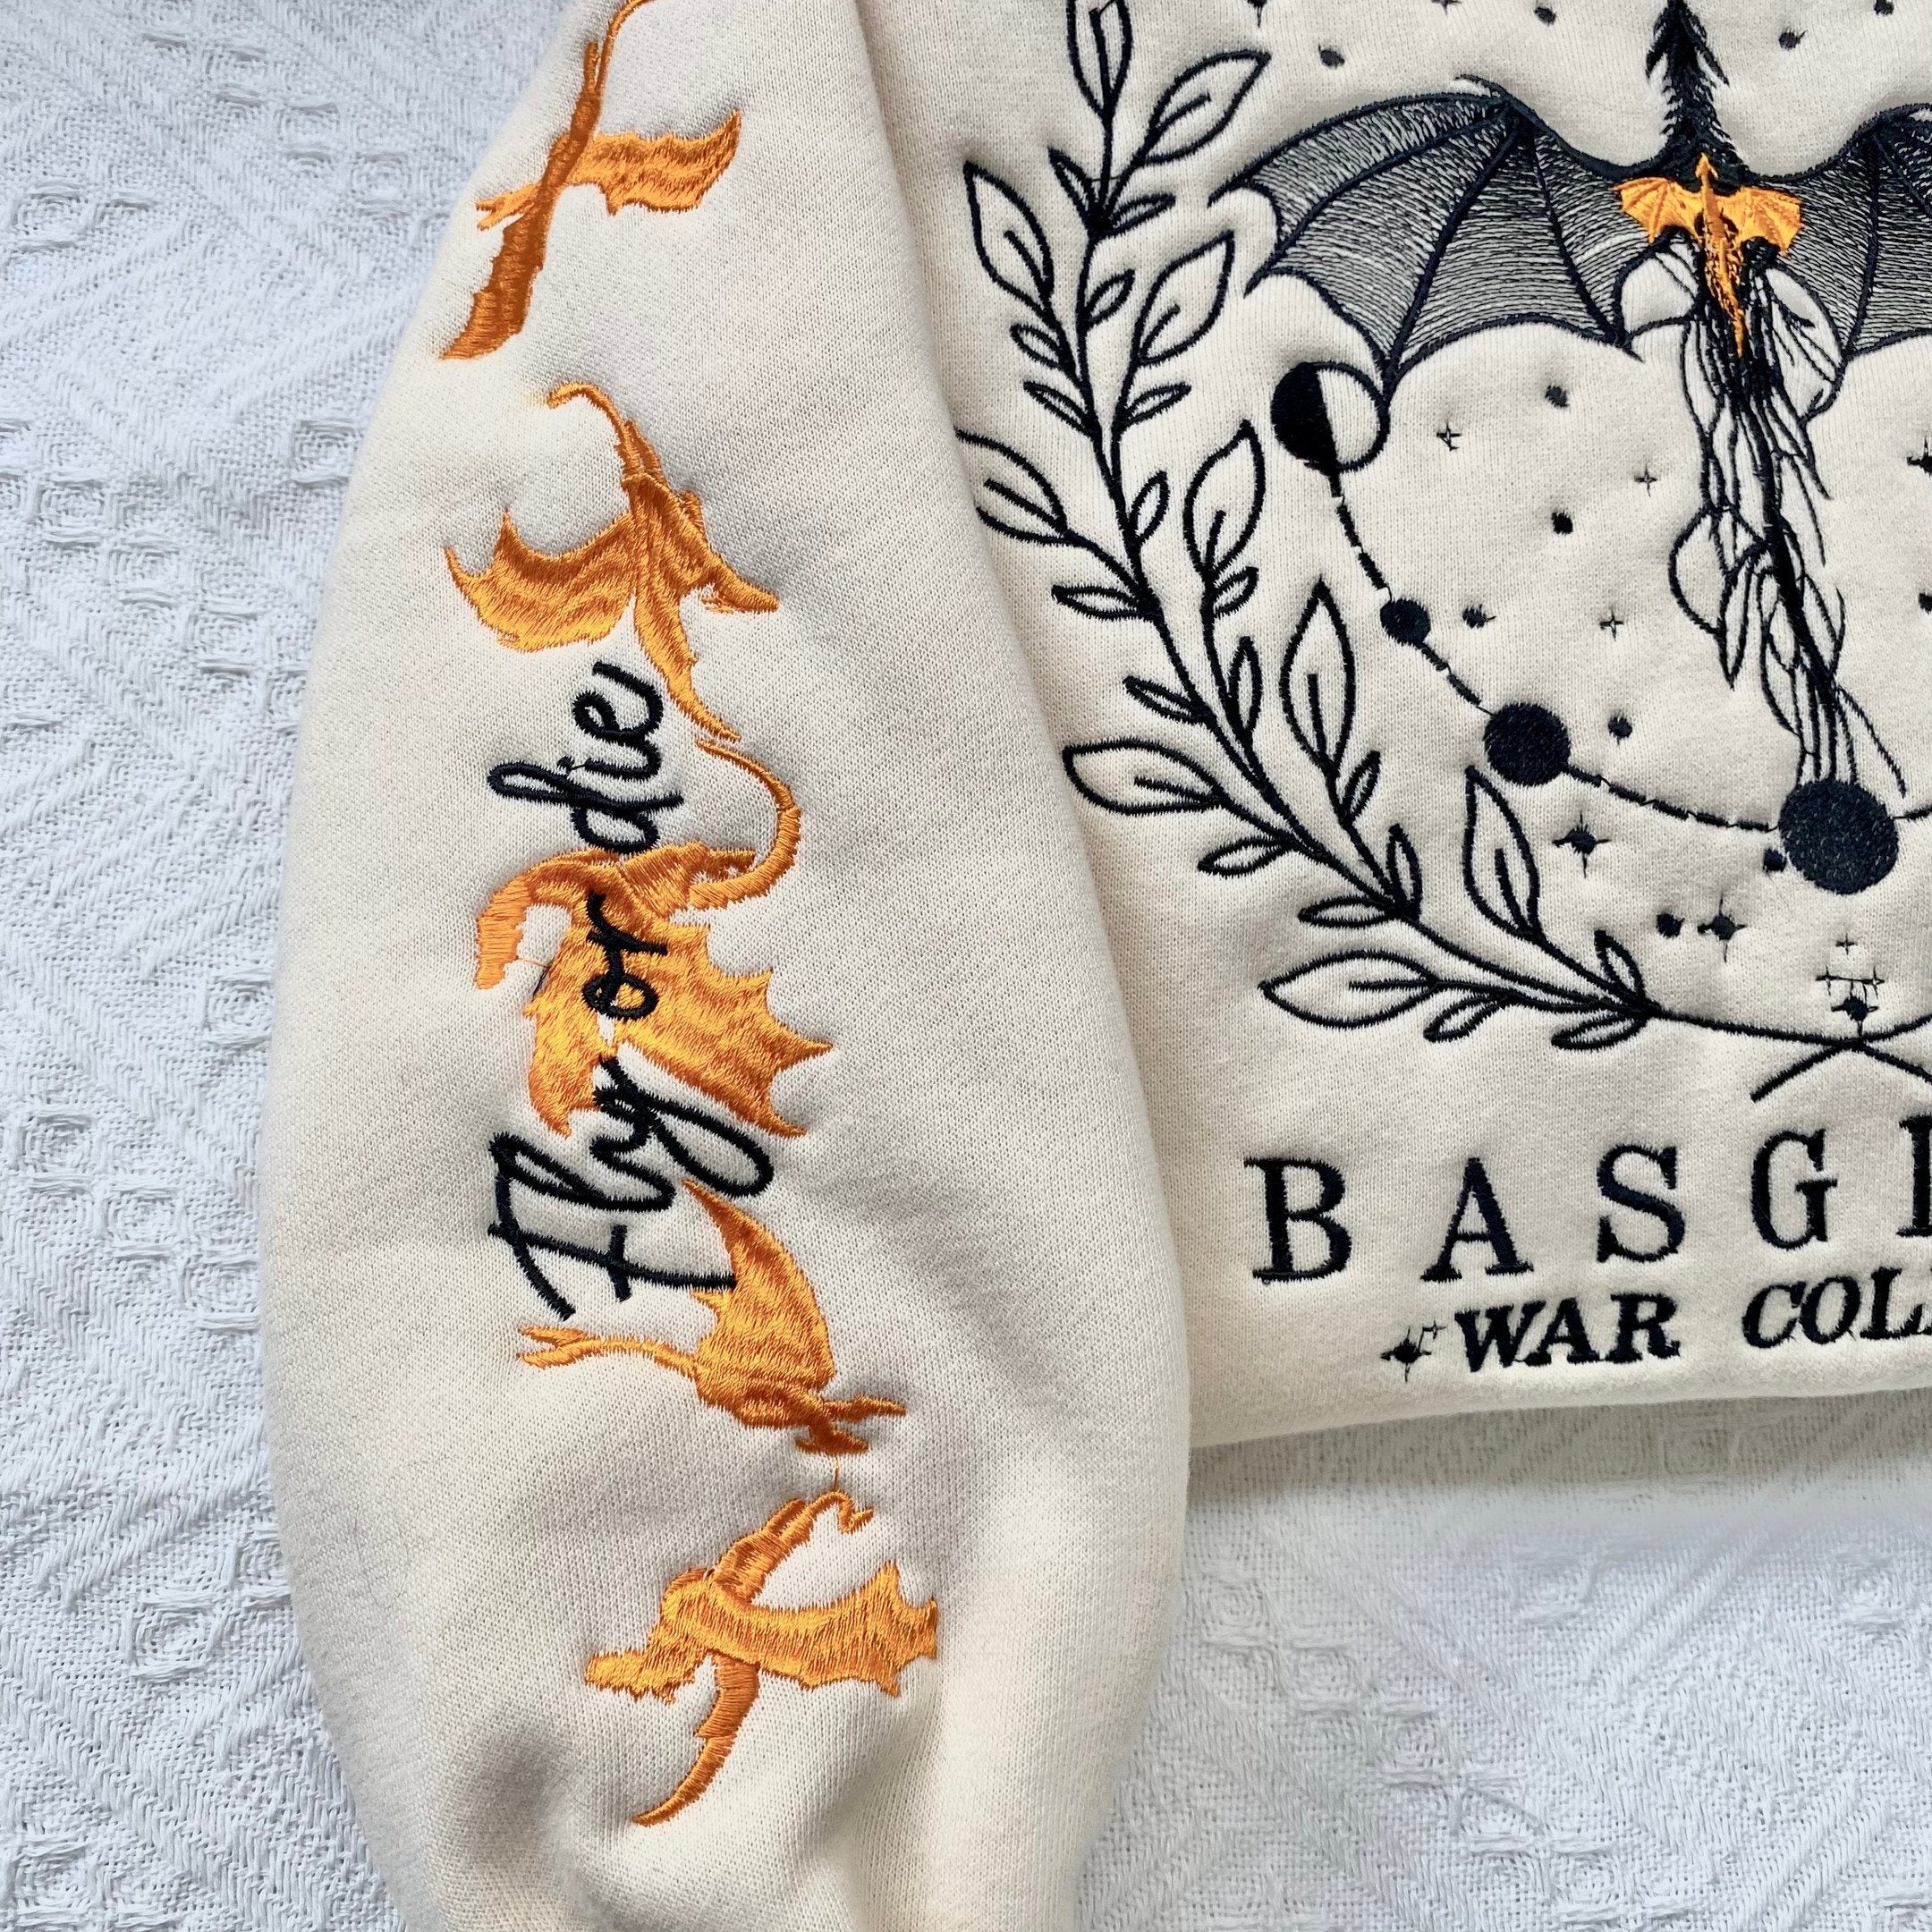 Basgiath Embroidered Sweatshirt, Fourth Wing Embroidered Hoodie Gifts For Book Lovers